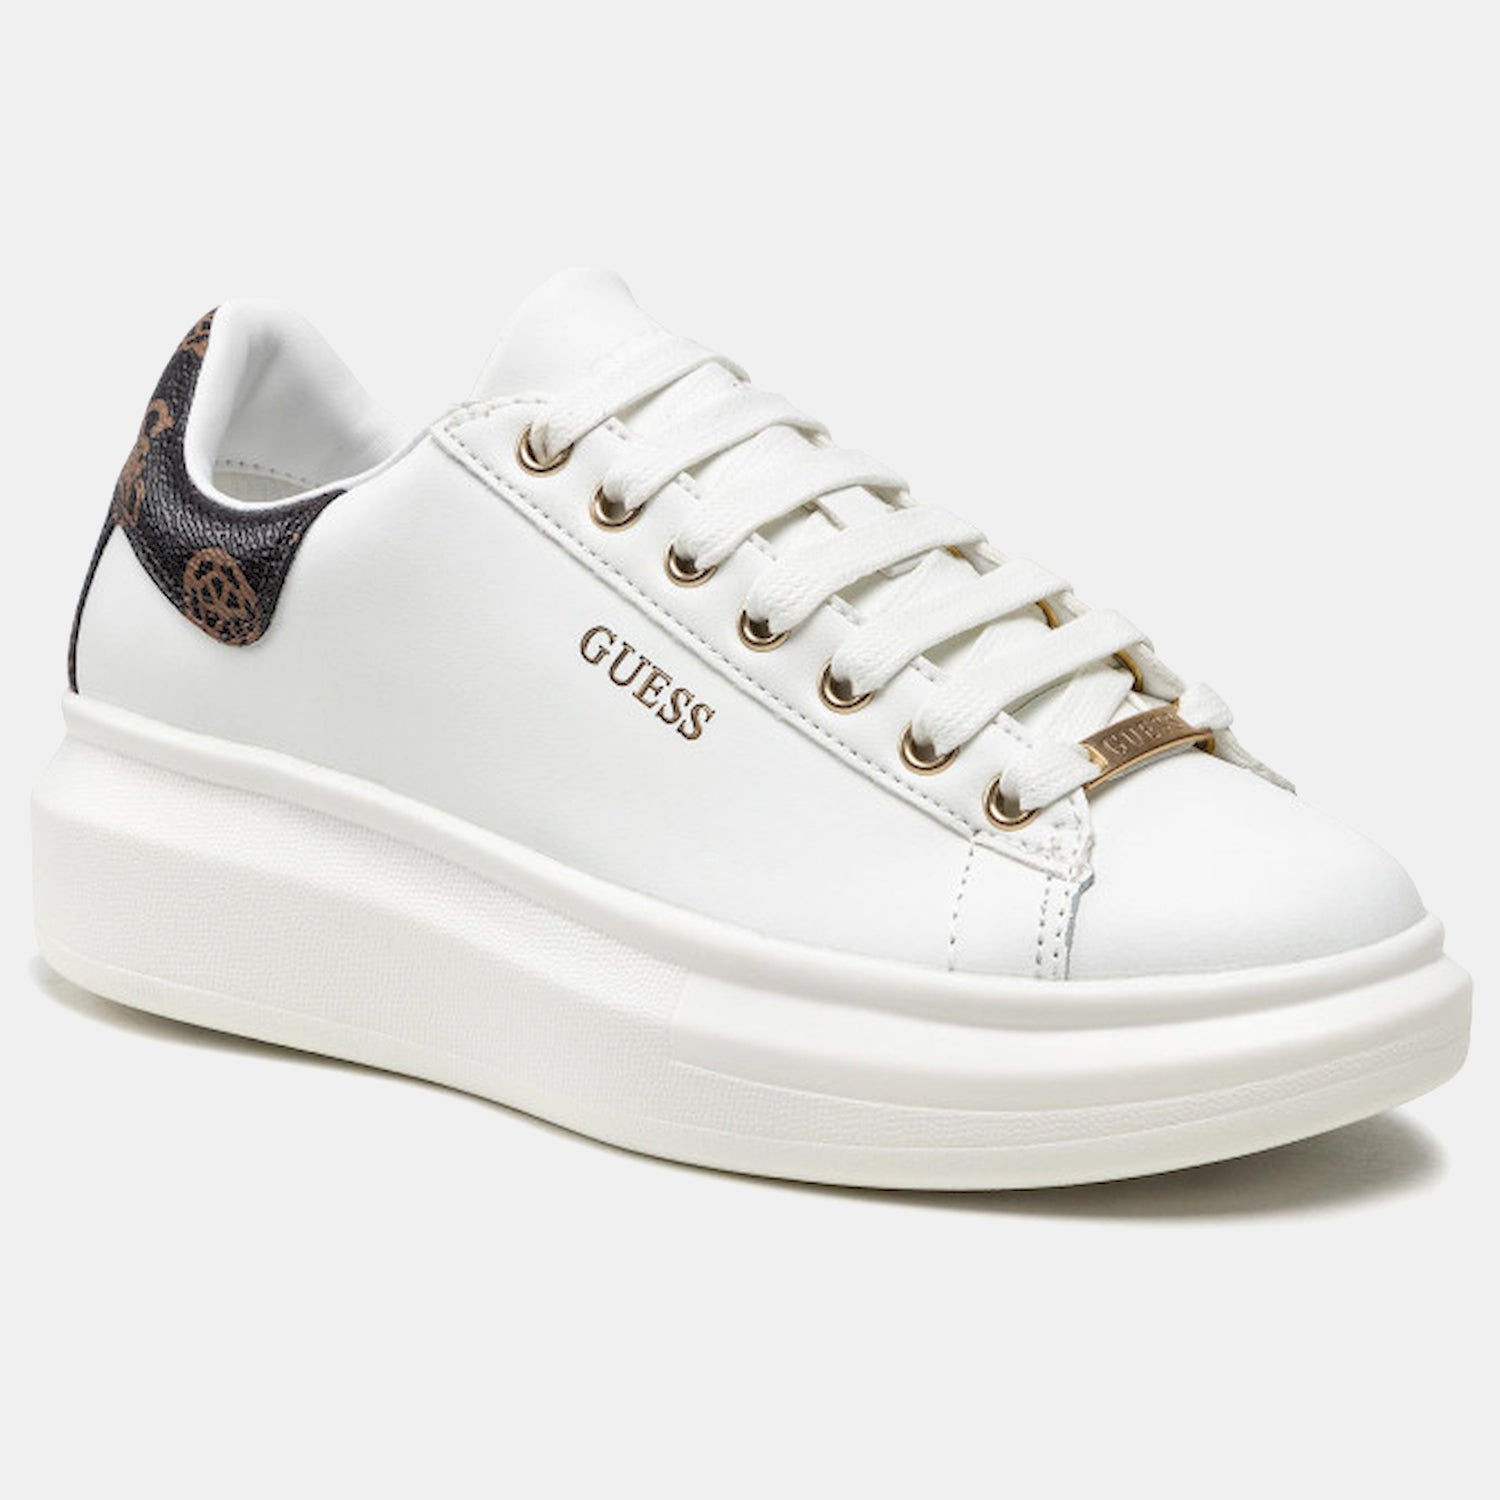 Guess Sapatilhas Sneakers Shoes Fl7rnofal12 Whi Brown Branco Castanho_shot1